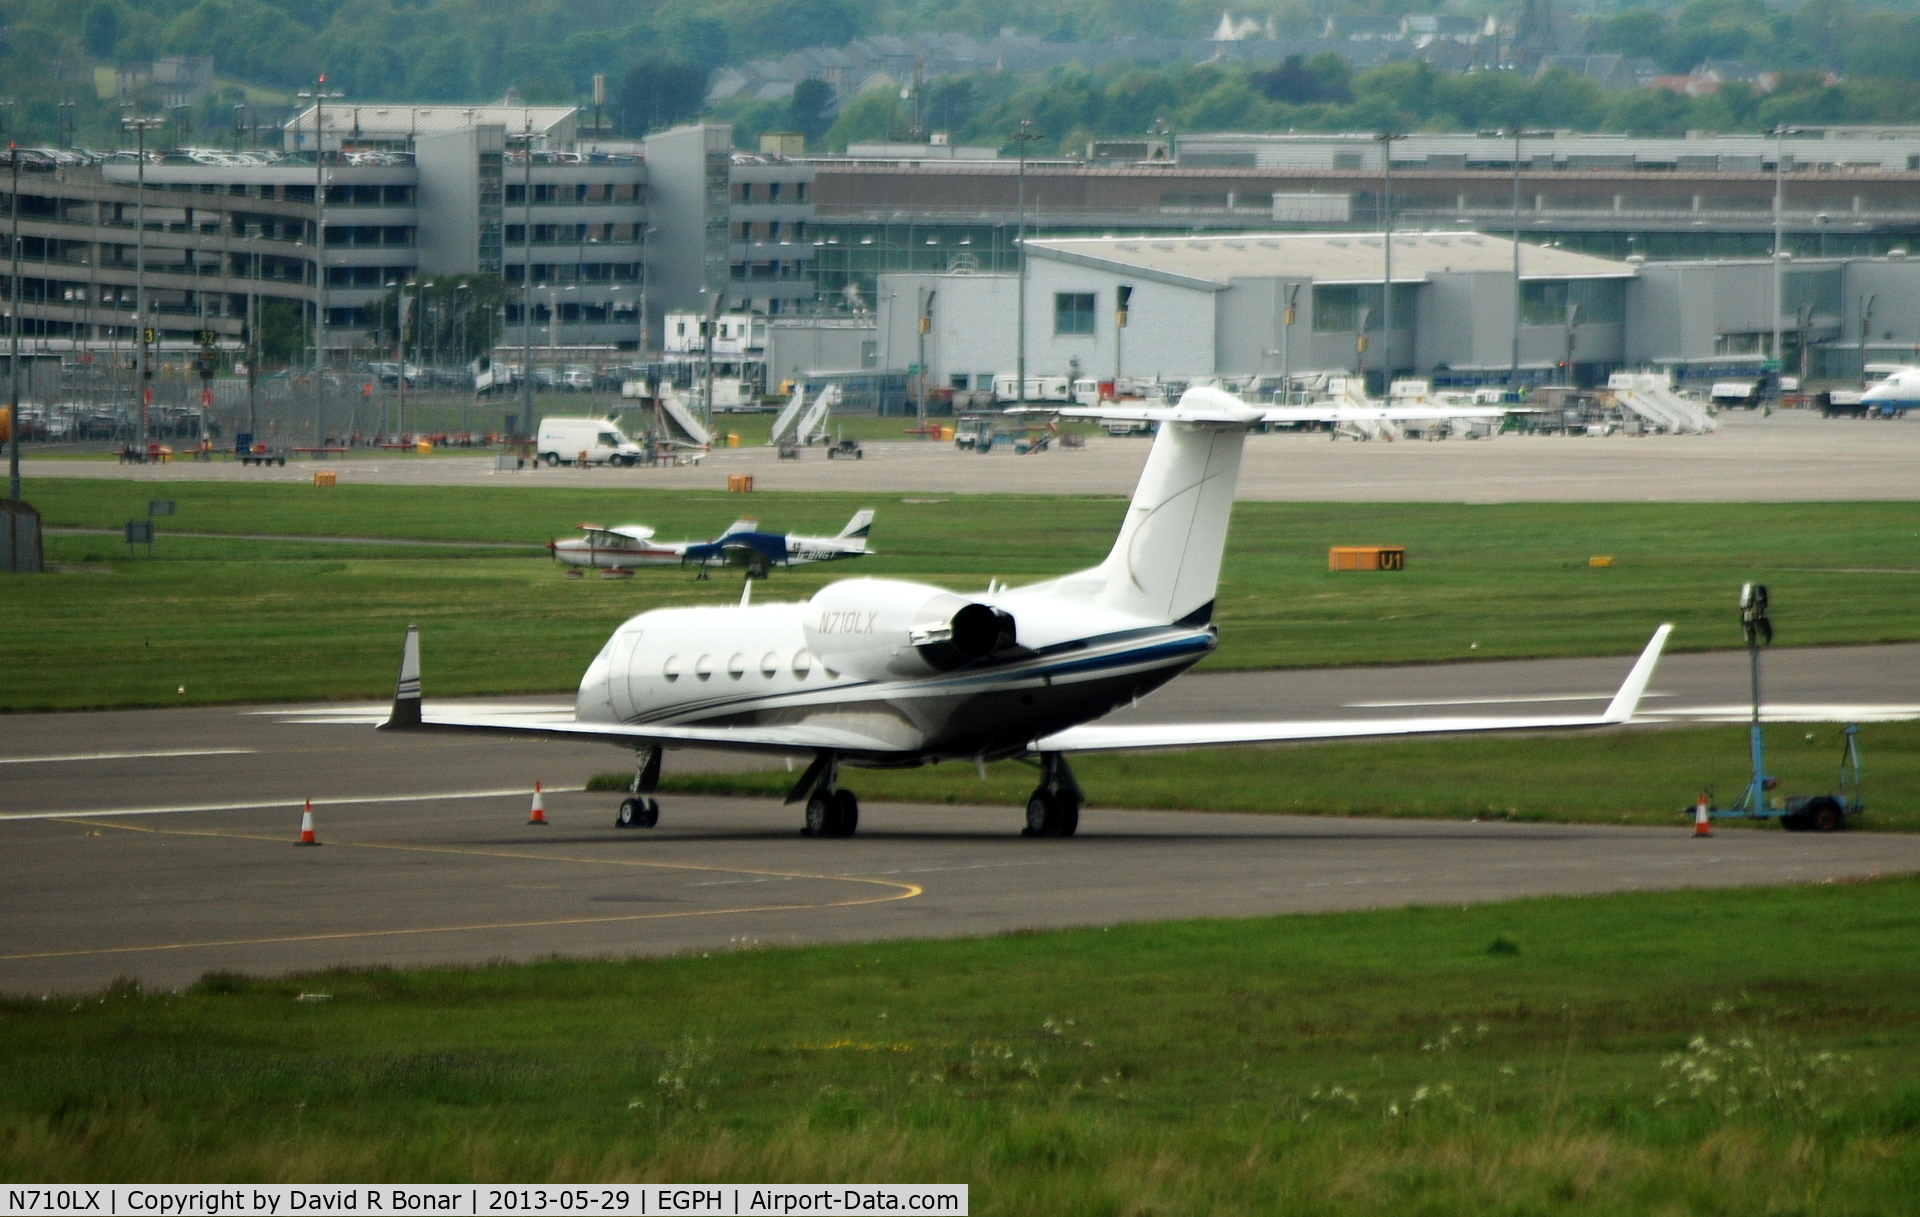 N710LX, 1996 Gulfstream Aerospace G-IV SP C/N 1297, Sitting on Block 30, the usual remote stand for visitors to Edinburgh.